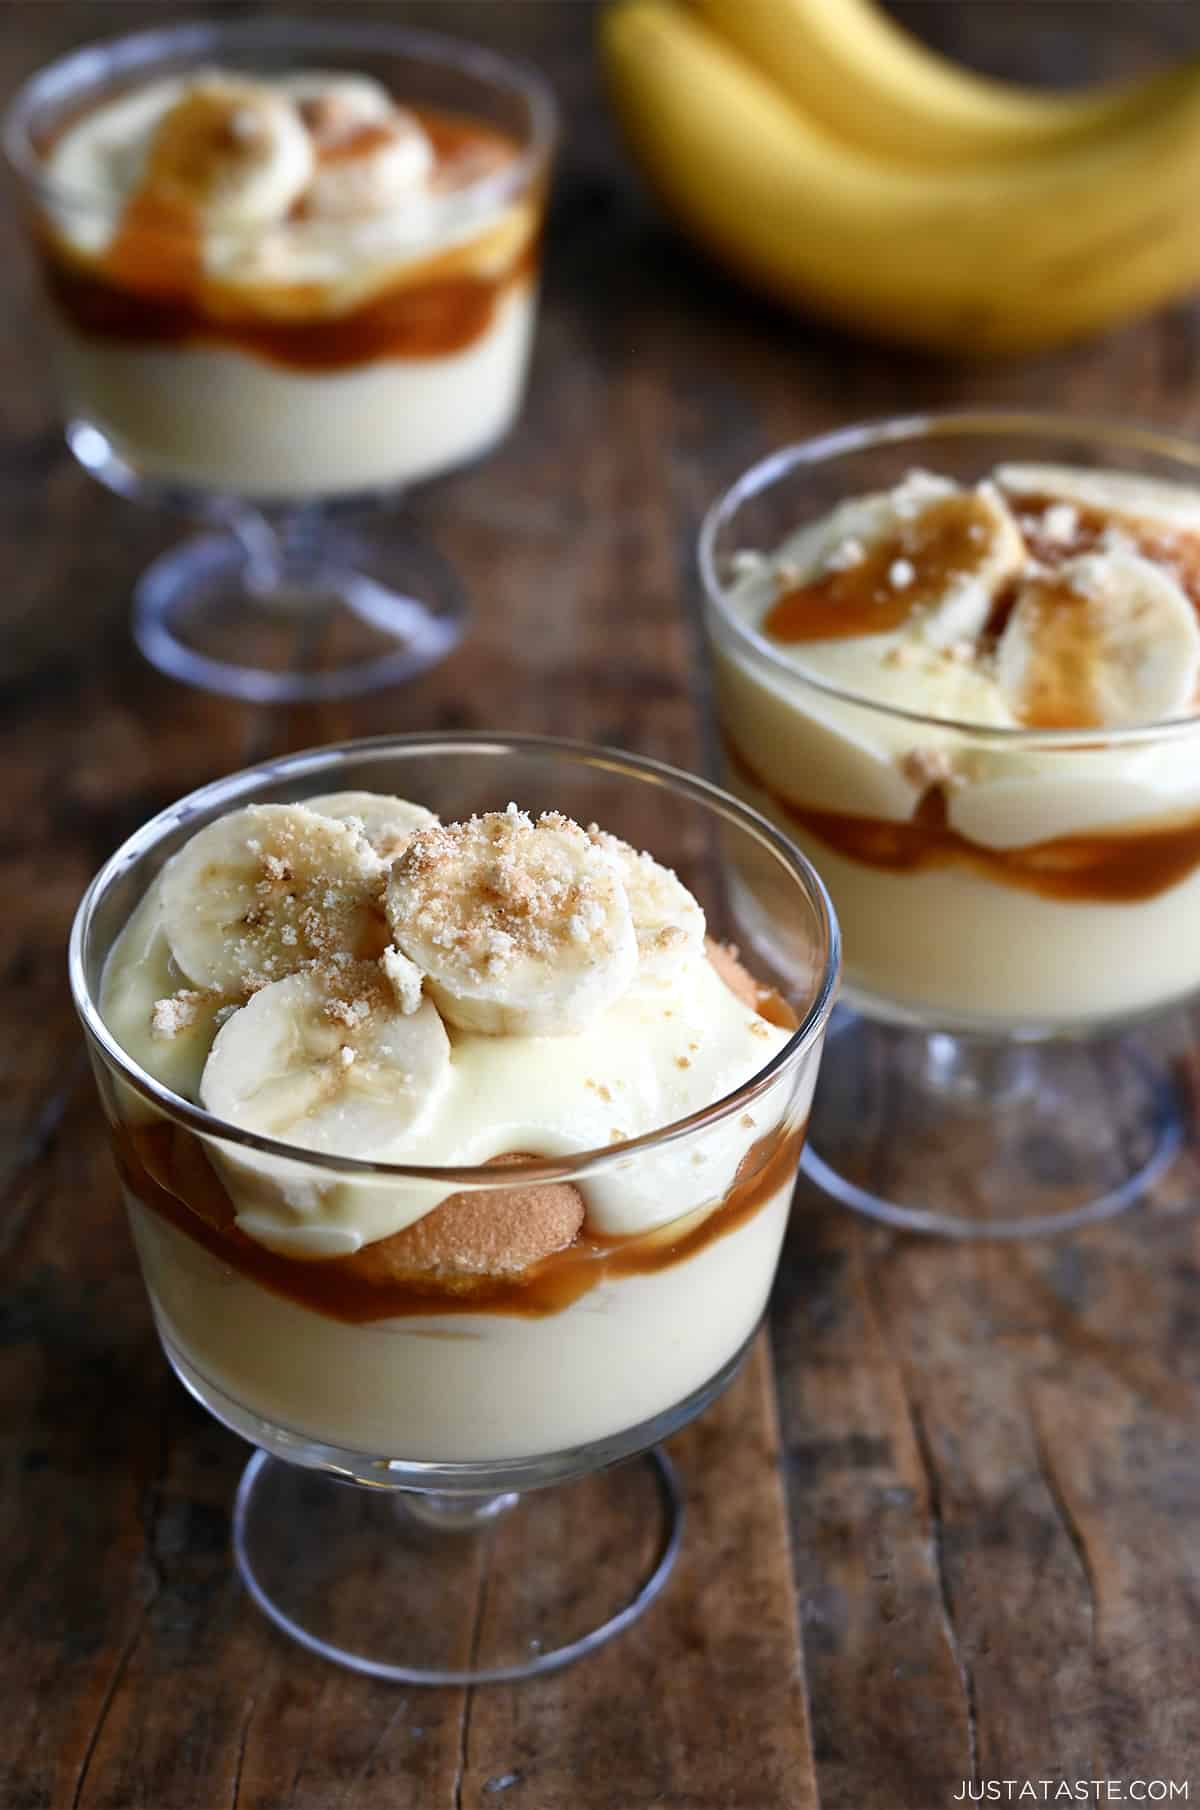 Three parfait glasses each filled with a layer of creamy banana pudding topped with salted caramel sauce, Nilla Wafers, sliced bananas and crushed wafers.